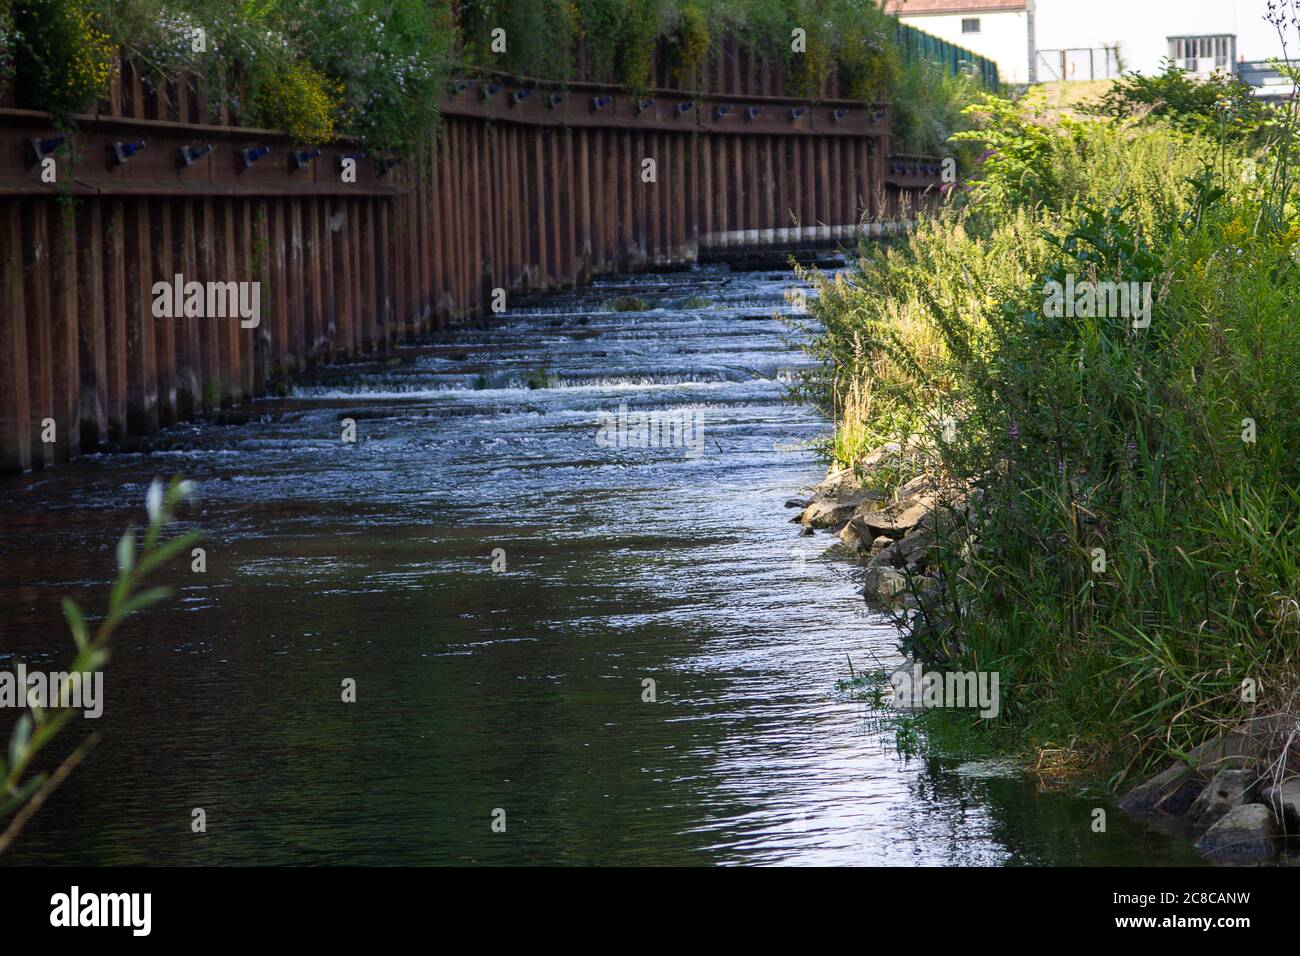 Here a fish ladder aid next to a hydroelectric power station. This allows fish to migrate upstream. Stock Photo